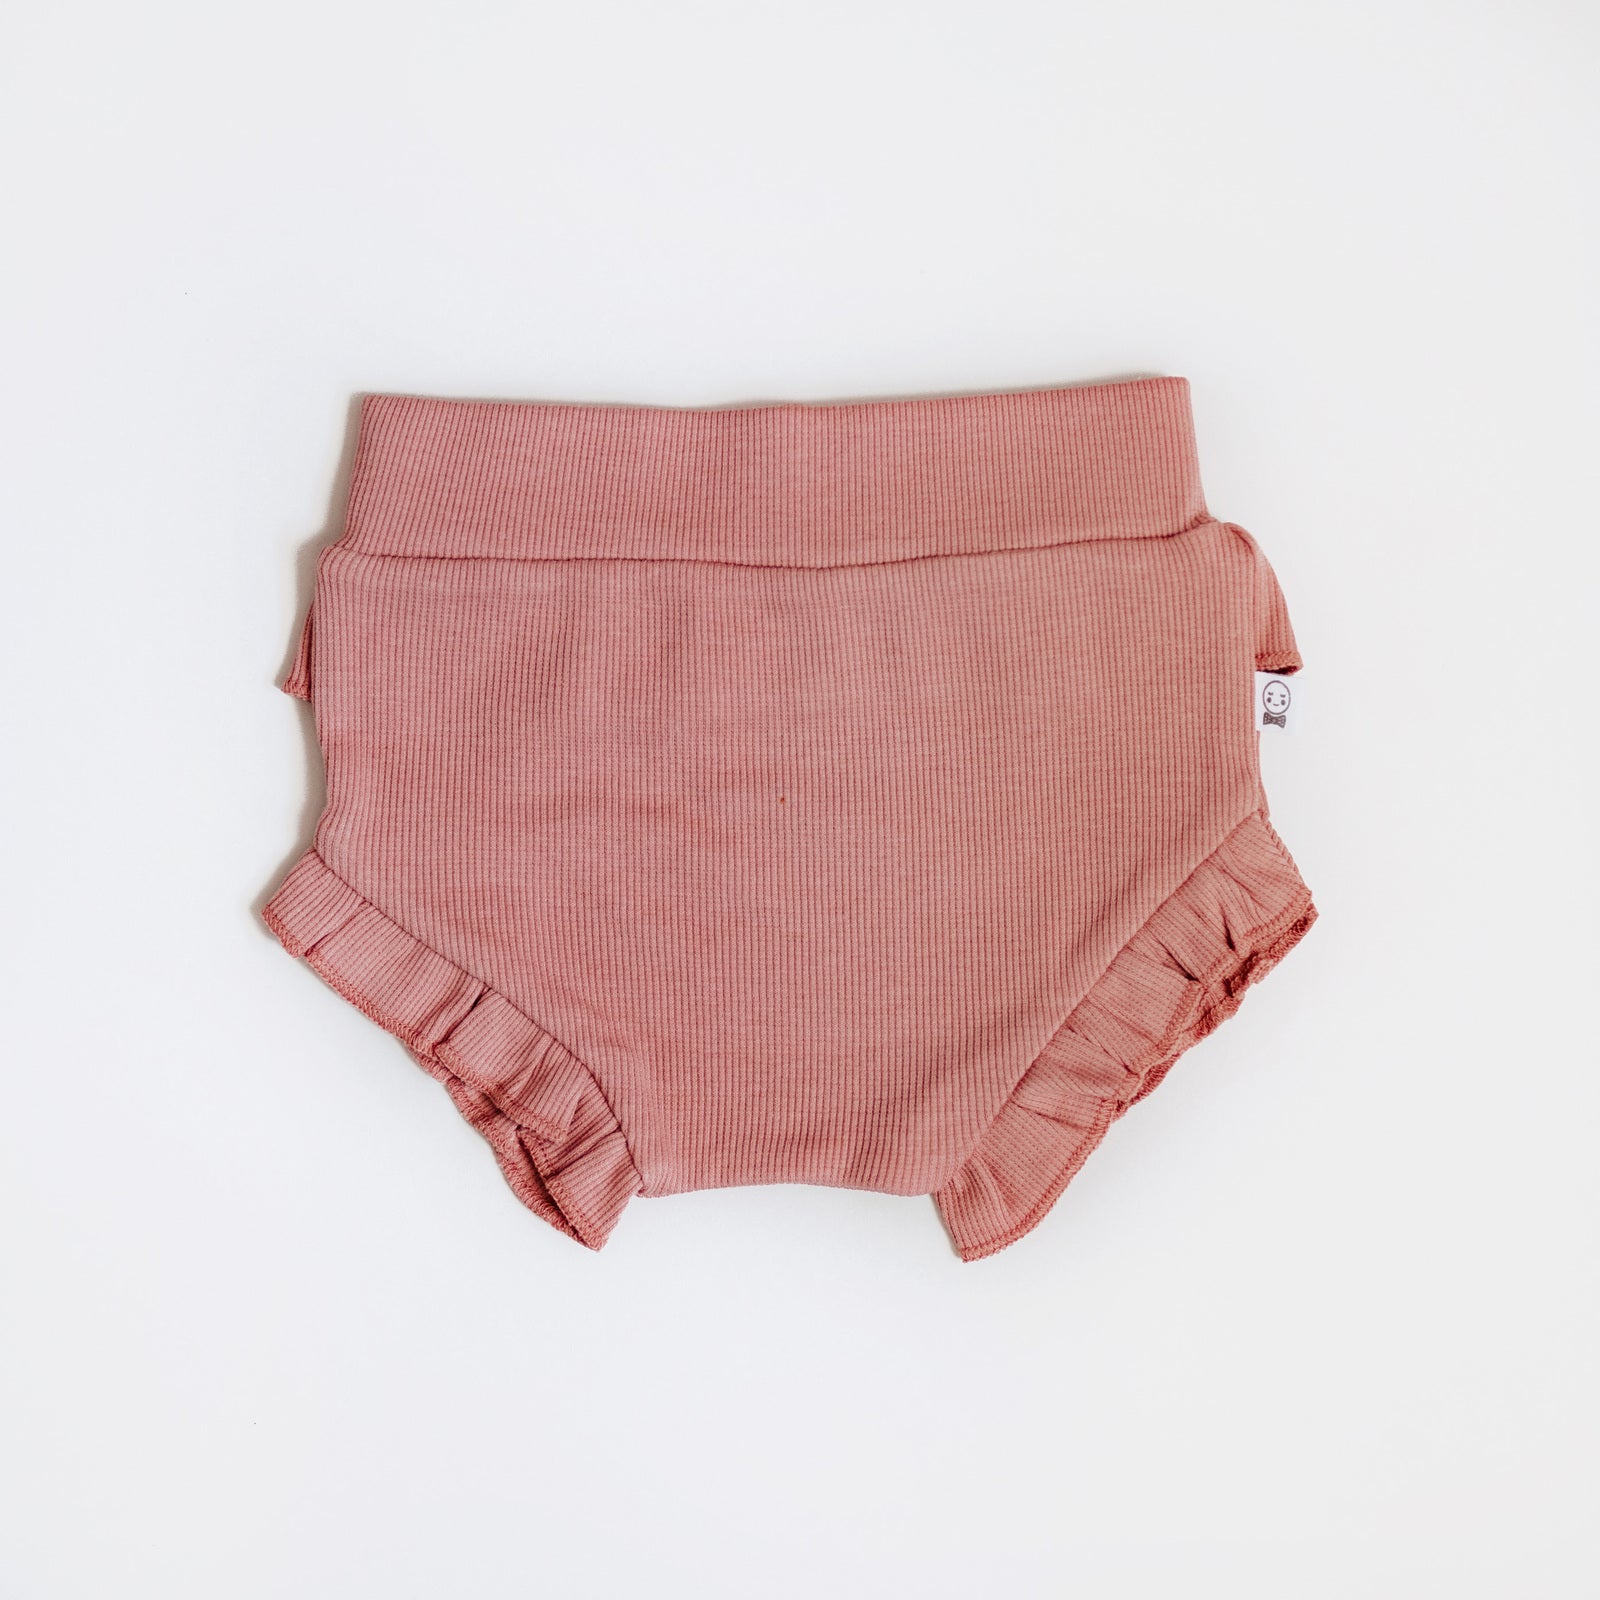 Snuggle Hunny Rose Bloomers 3-6 months